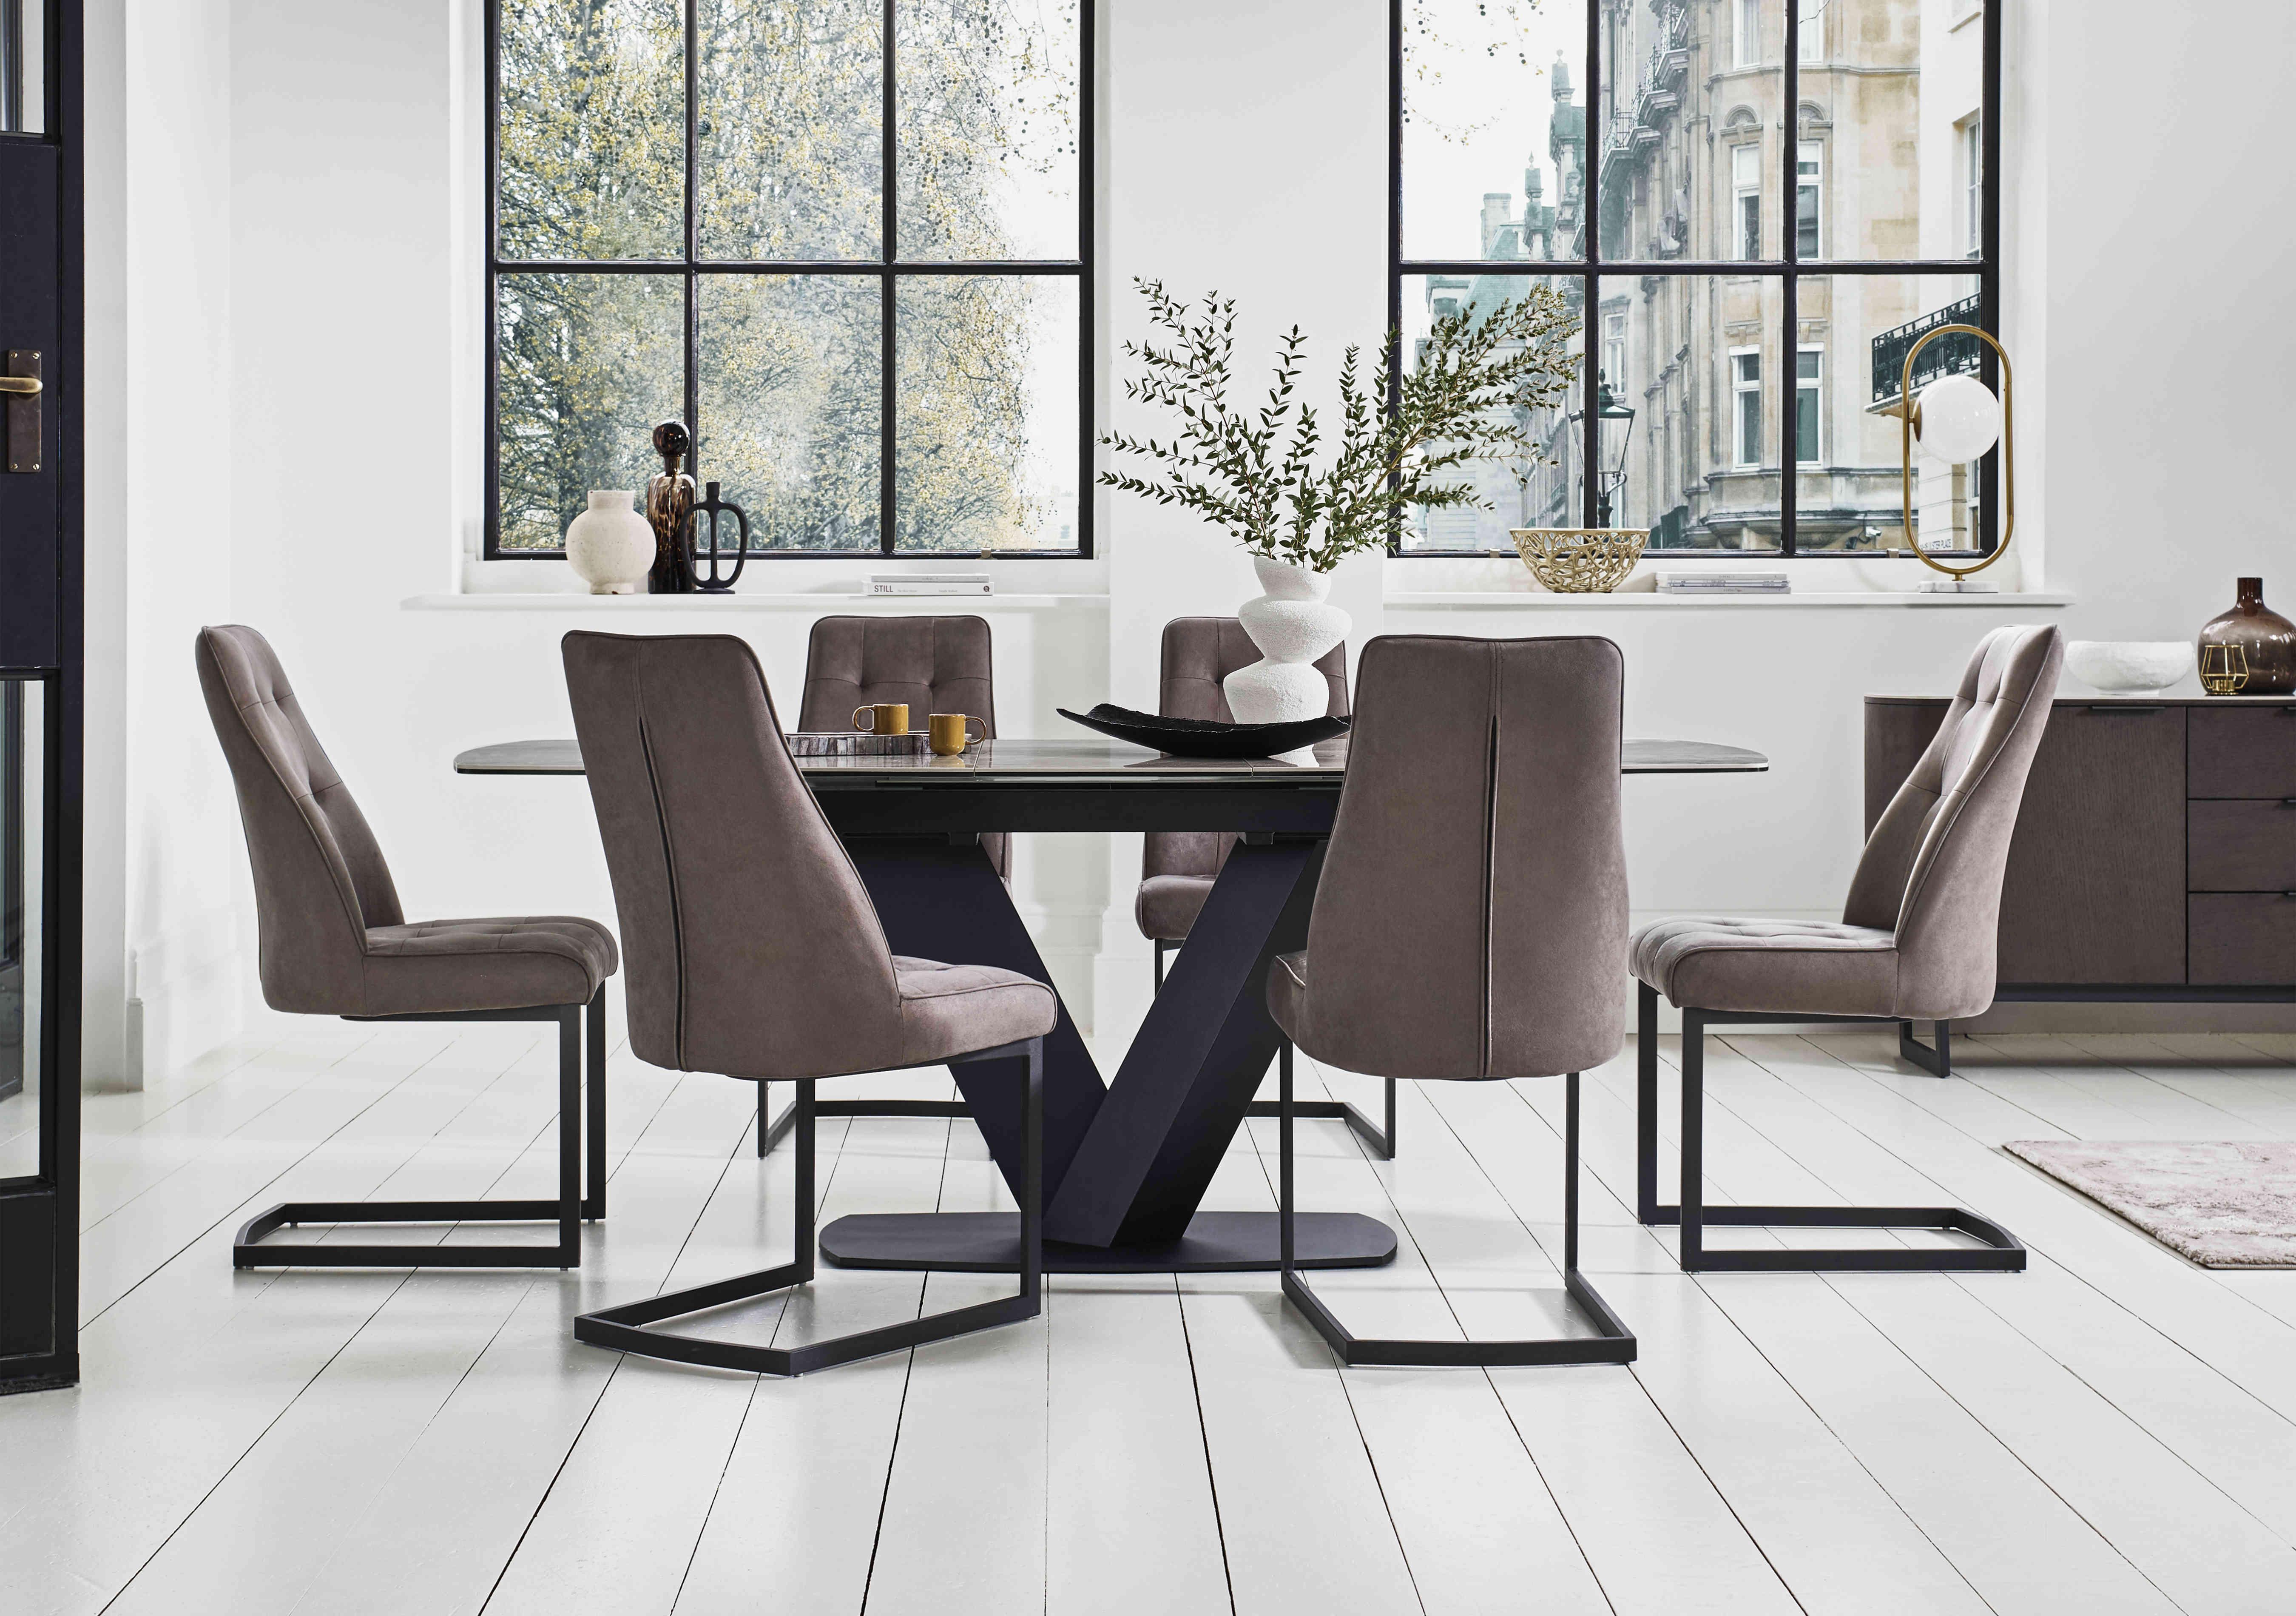 Merlin Large Extending Dining Table with 6 Chairs Dining Set in  on Furniture Village